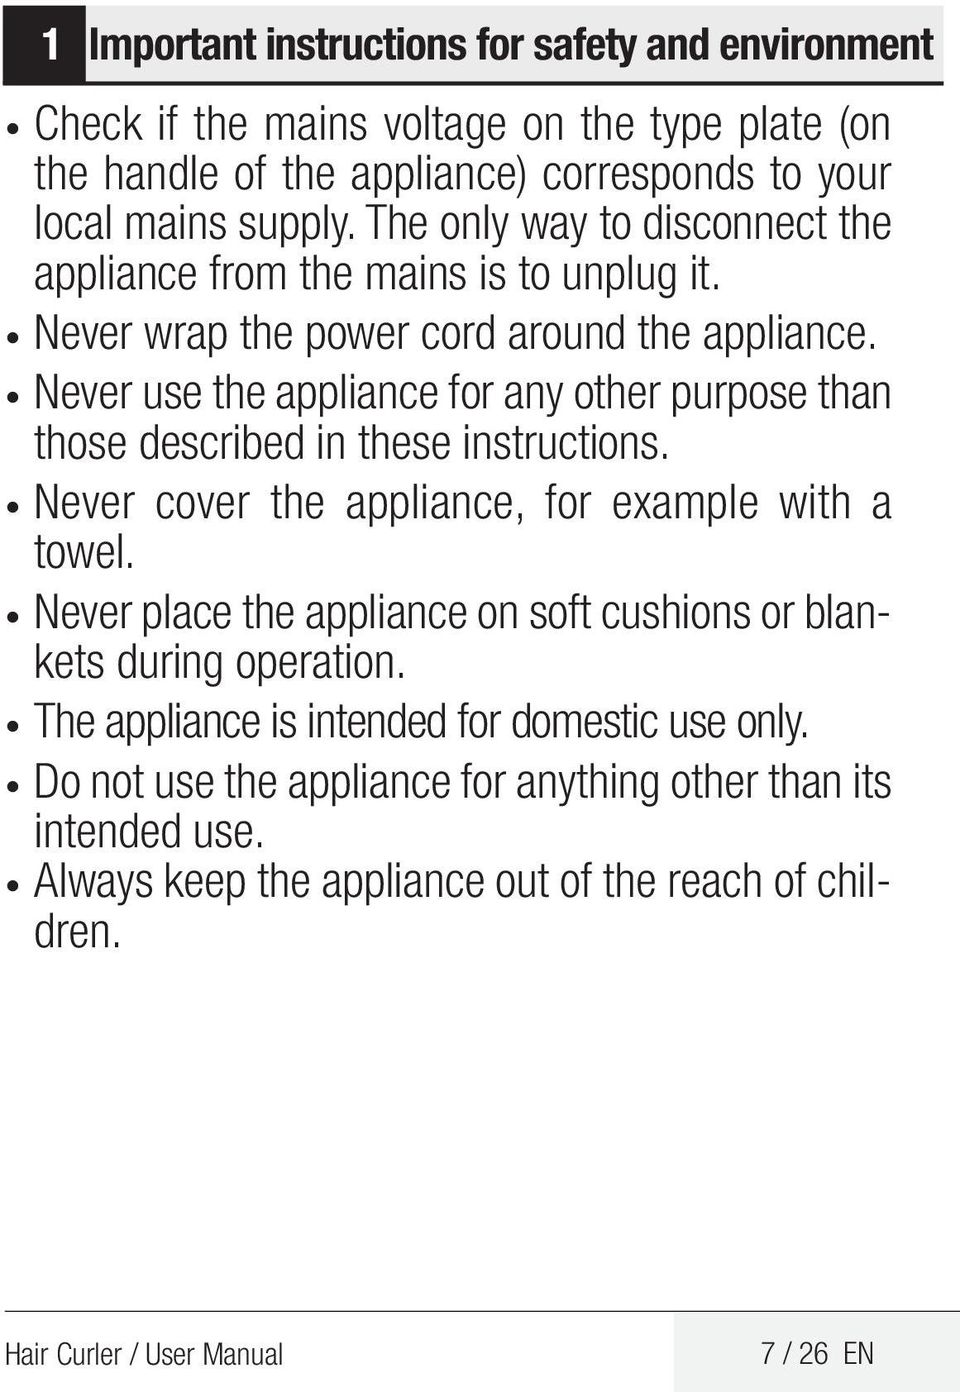 Never use the appliance for any other purpose than those described in these instructions. Never cover the appliance, for example with a towel.